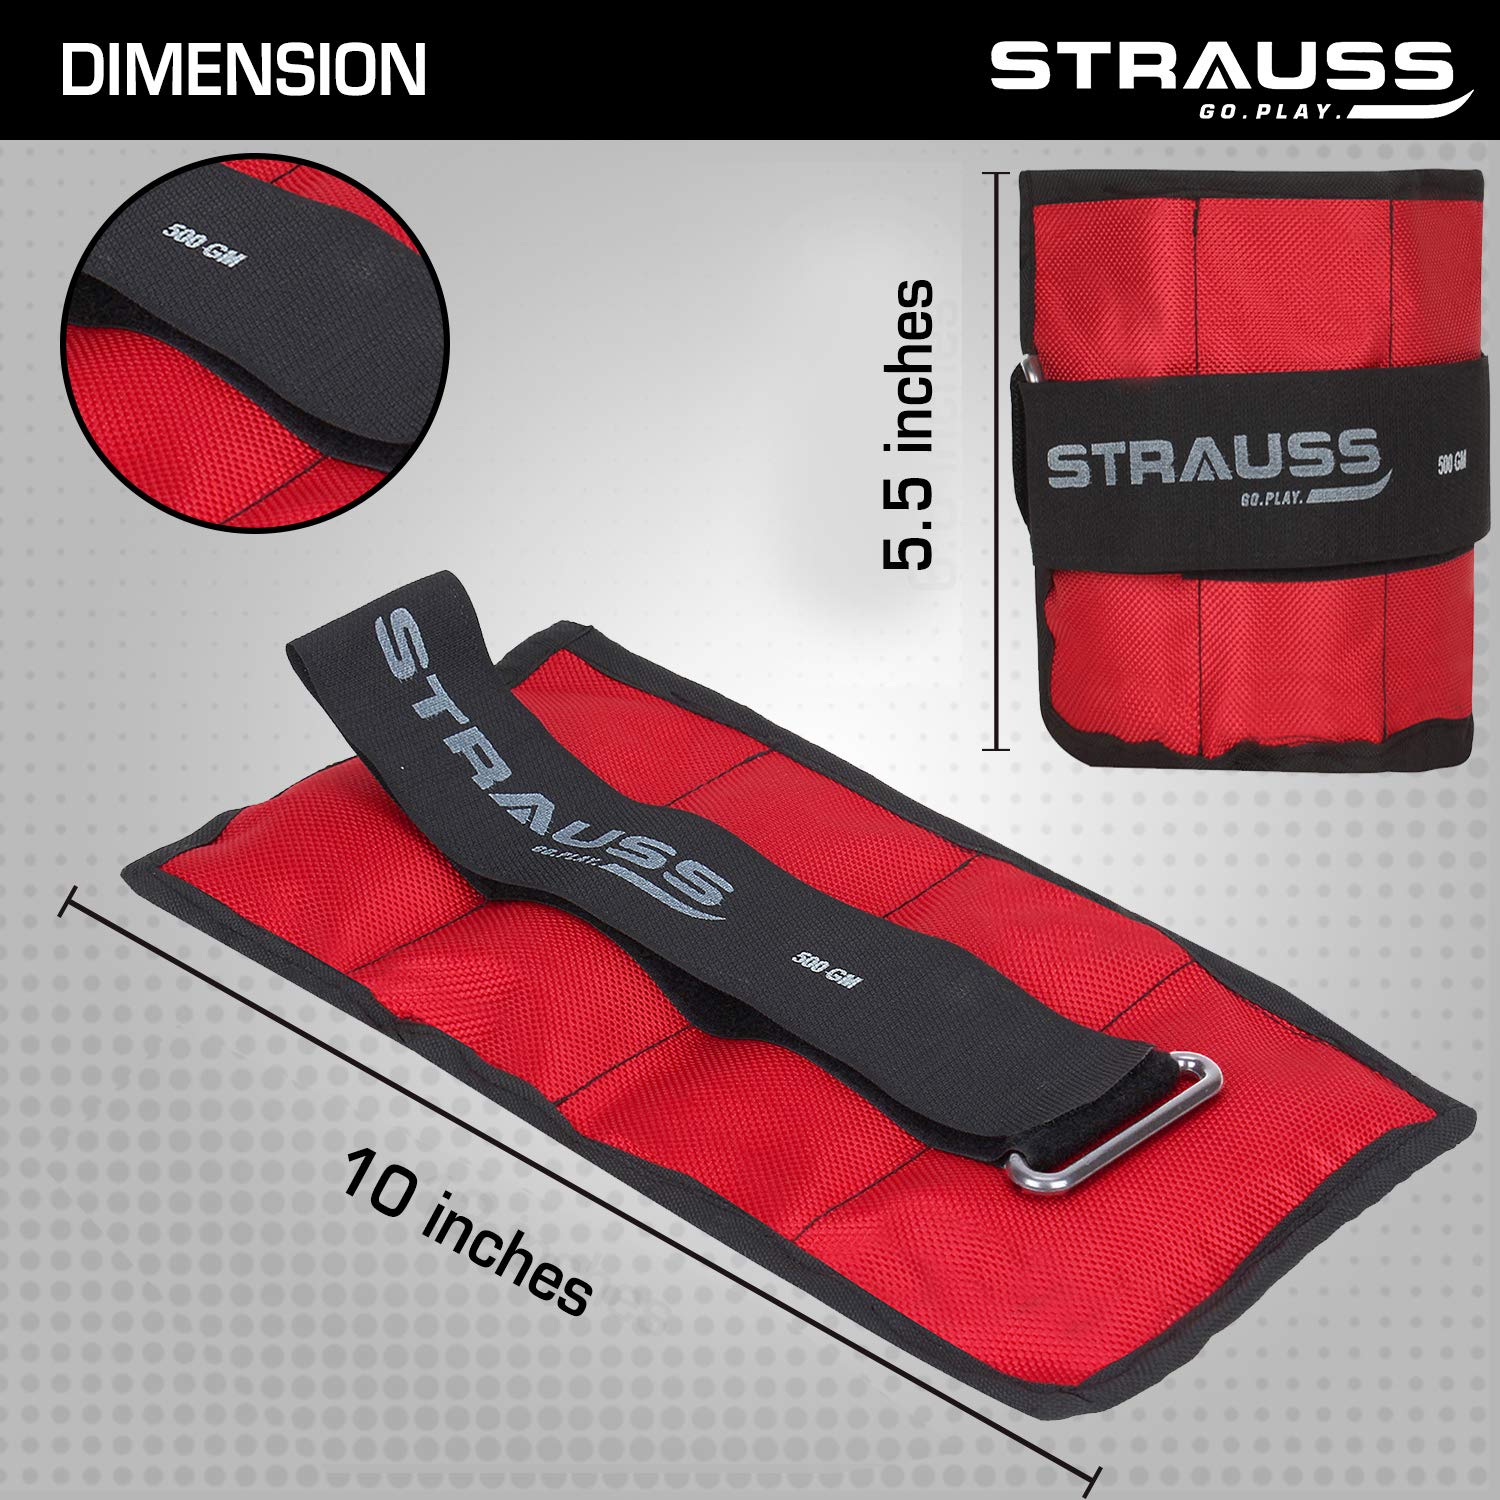 Strauss Adjustable Ankle/Wrist Weights 0.5 KG X 2 | Ideal for Walking, Running, Jogging, Cycling, Gym, Workout & Strength Training | Easy to Use on Ankle, Wrist, Leg, (Red)